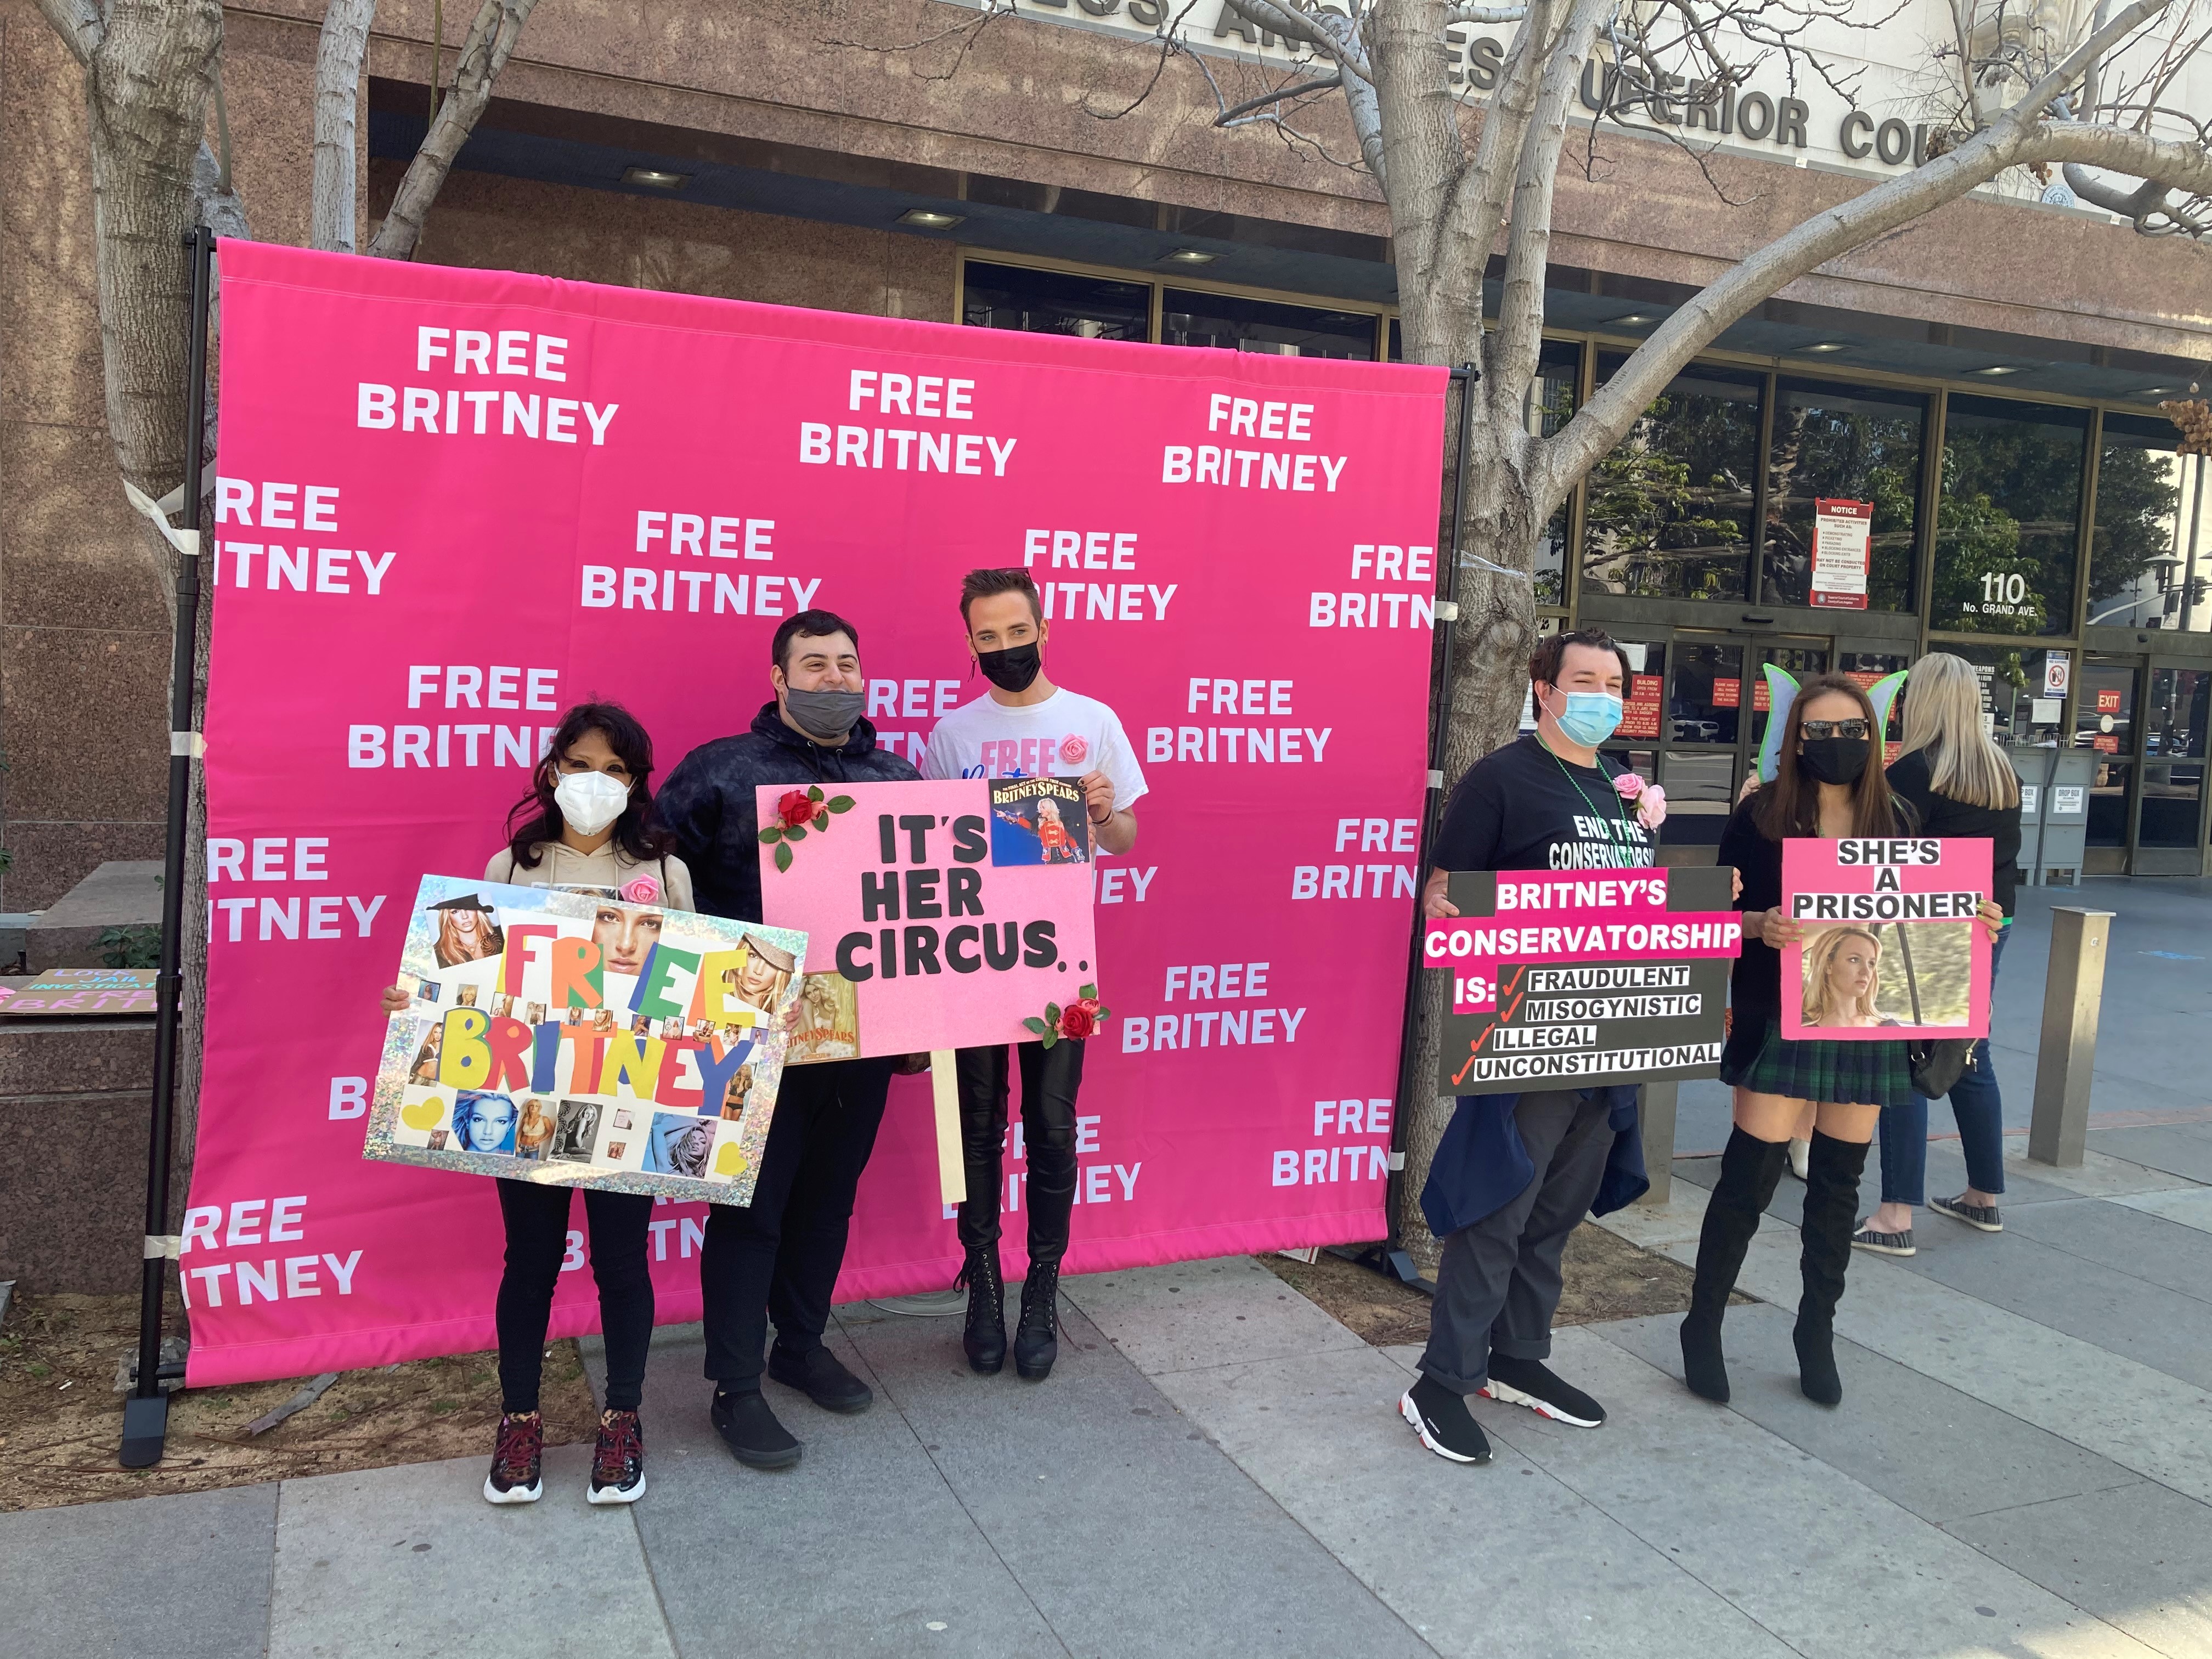 Free Britney supporters